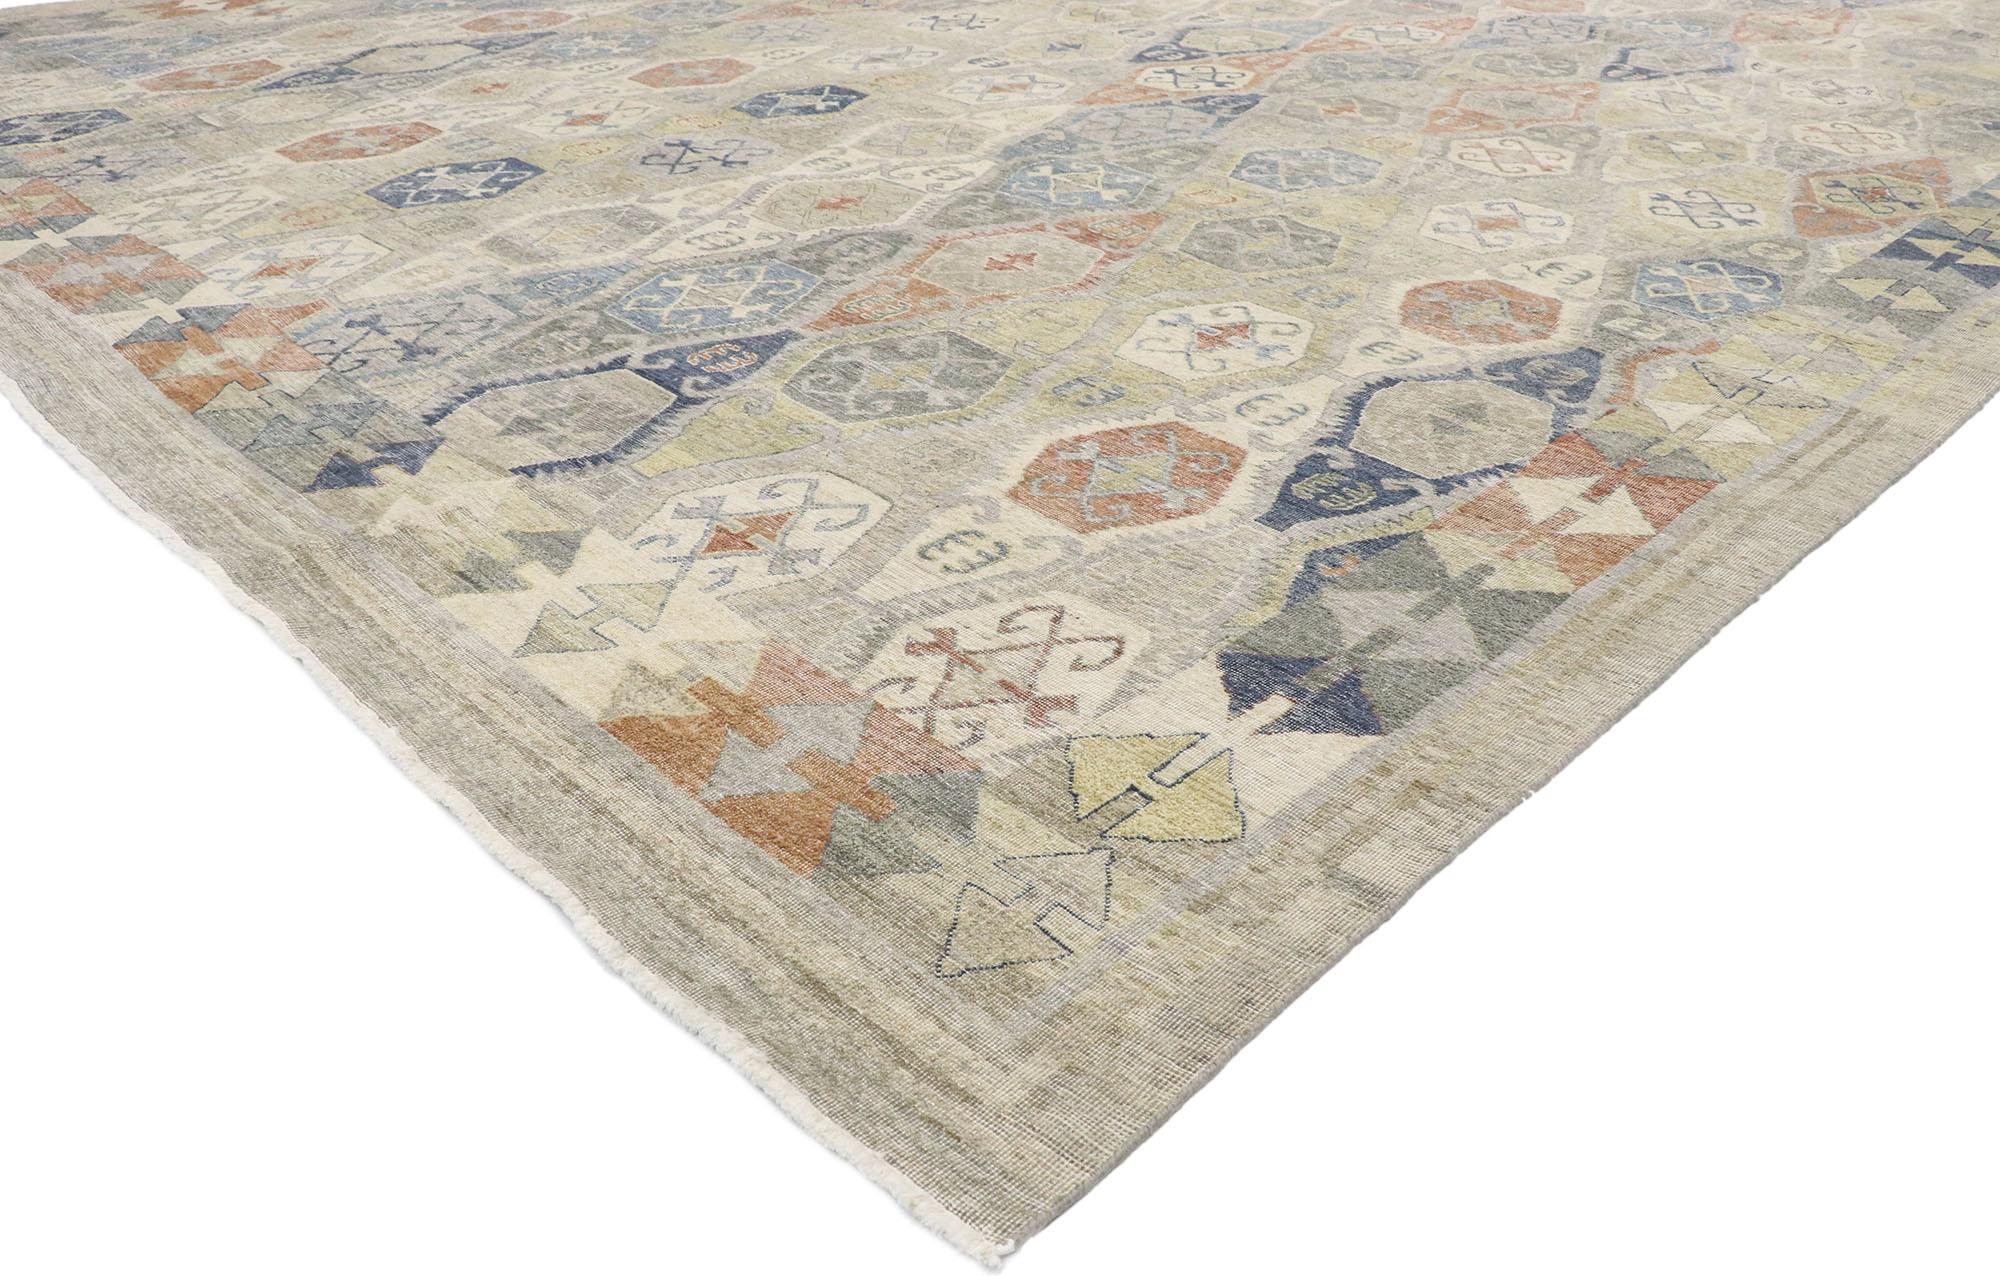 30626, new contemporary Oushak style rug with Modern Rustic Tribal style. With its modern rustic tribal style, incredible detail and texture, this hand-knotted wool contemporary Oushak style rug is a captivating vision of woven beauty. The abrashed